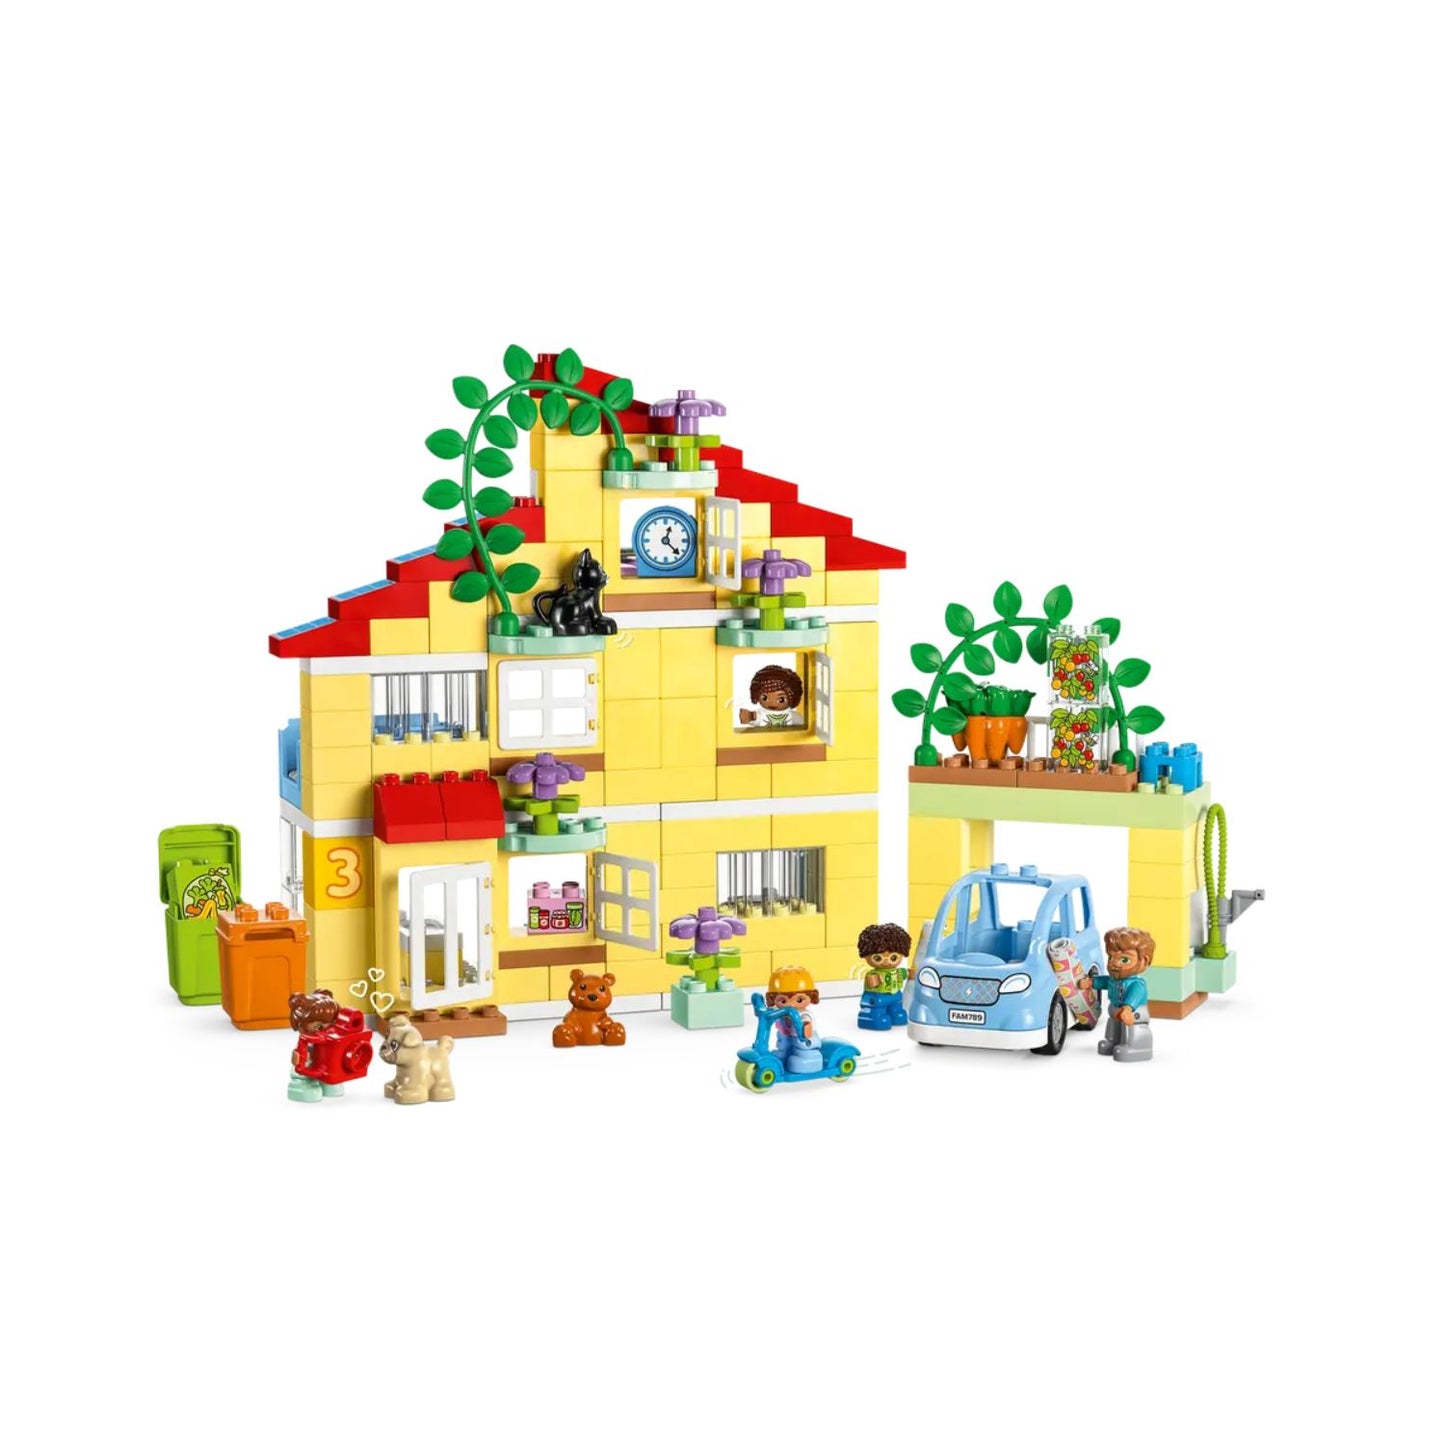 Lego - Duplo House 3 in 1 10994